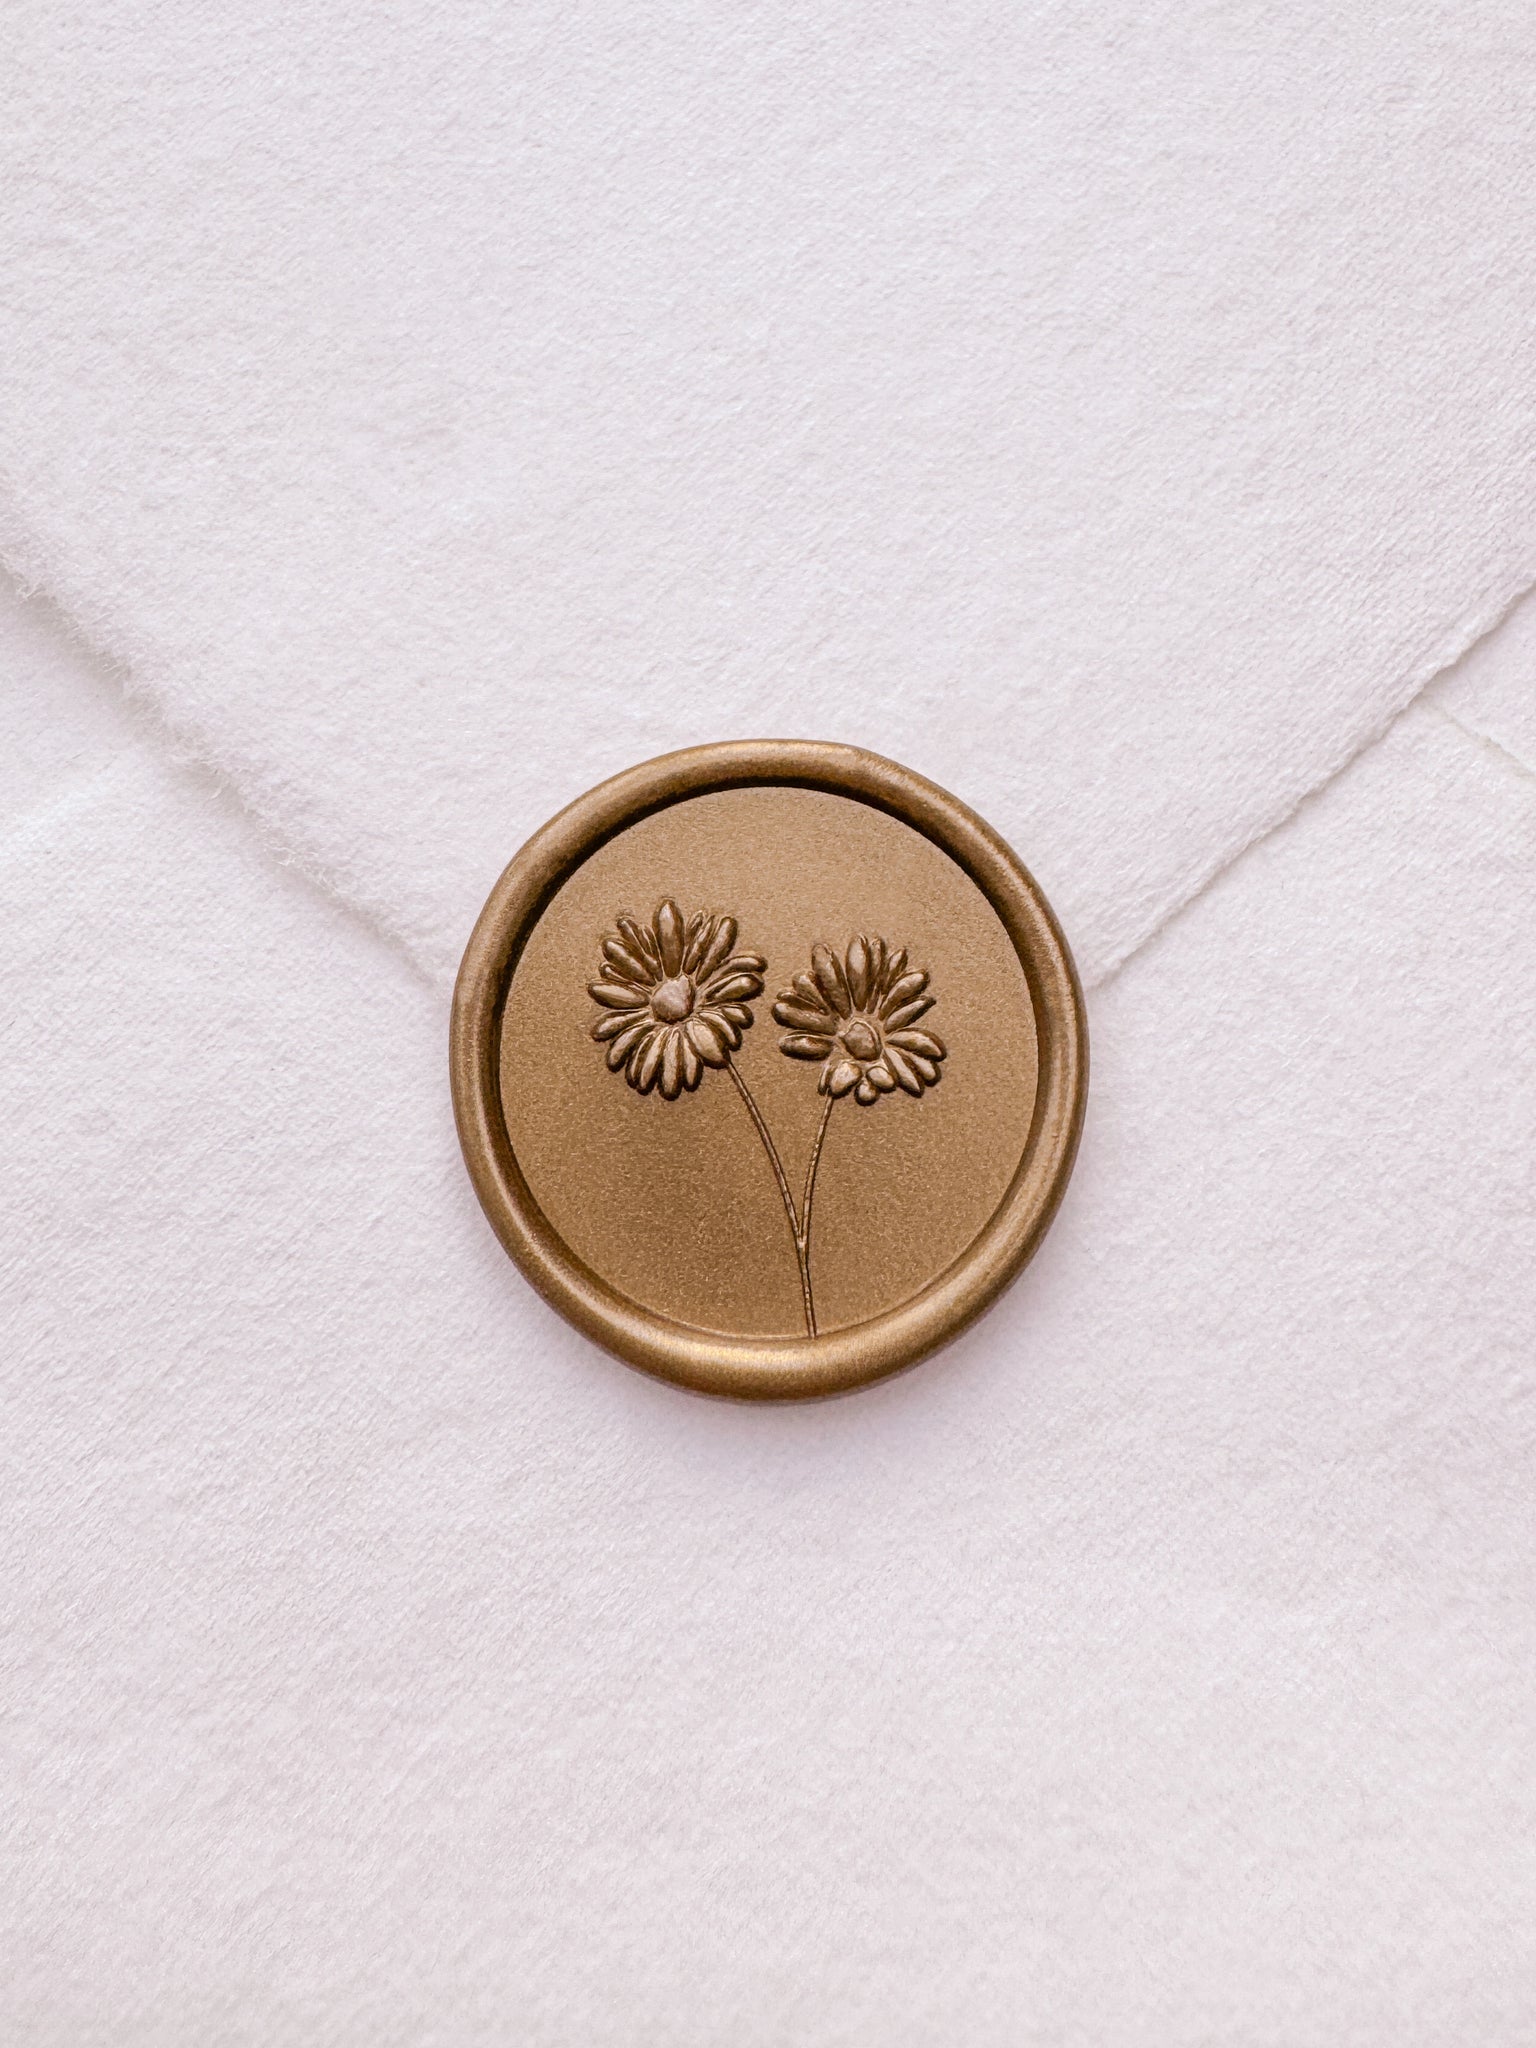 Daisies gold wax seal on white handmade paper envelope